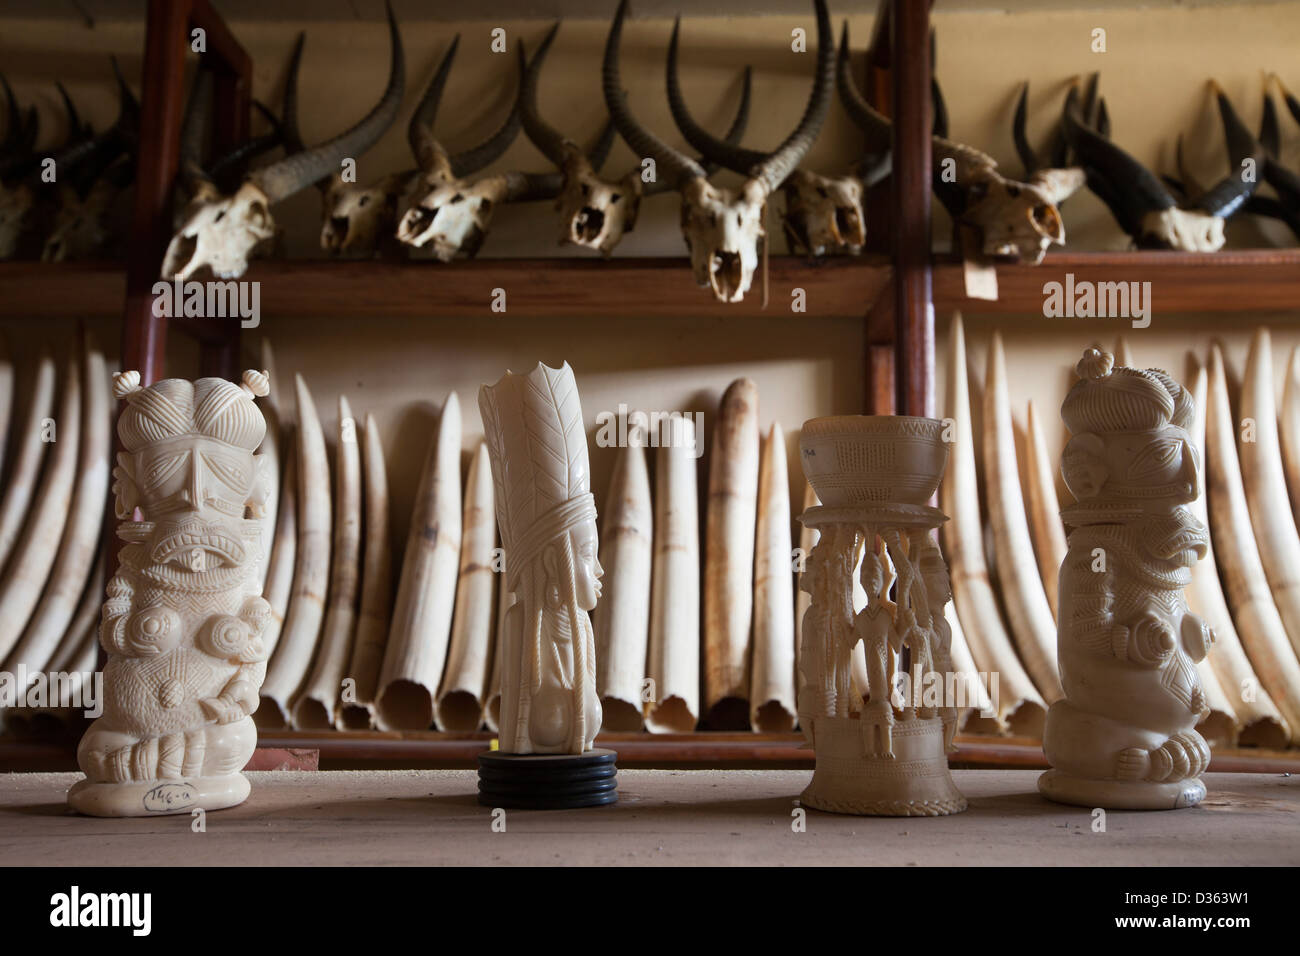 CAMEROON, 3rd October 2012: Carved Ivory and elephant tusks confiscated by the Ministry of Forests and Wildlife. Stock Photo